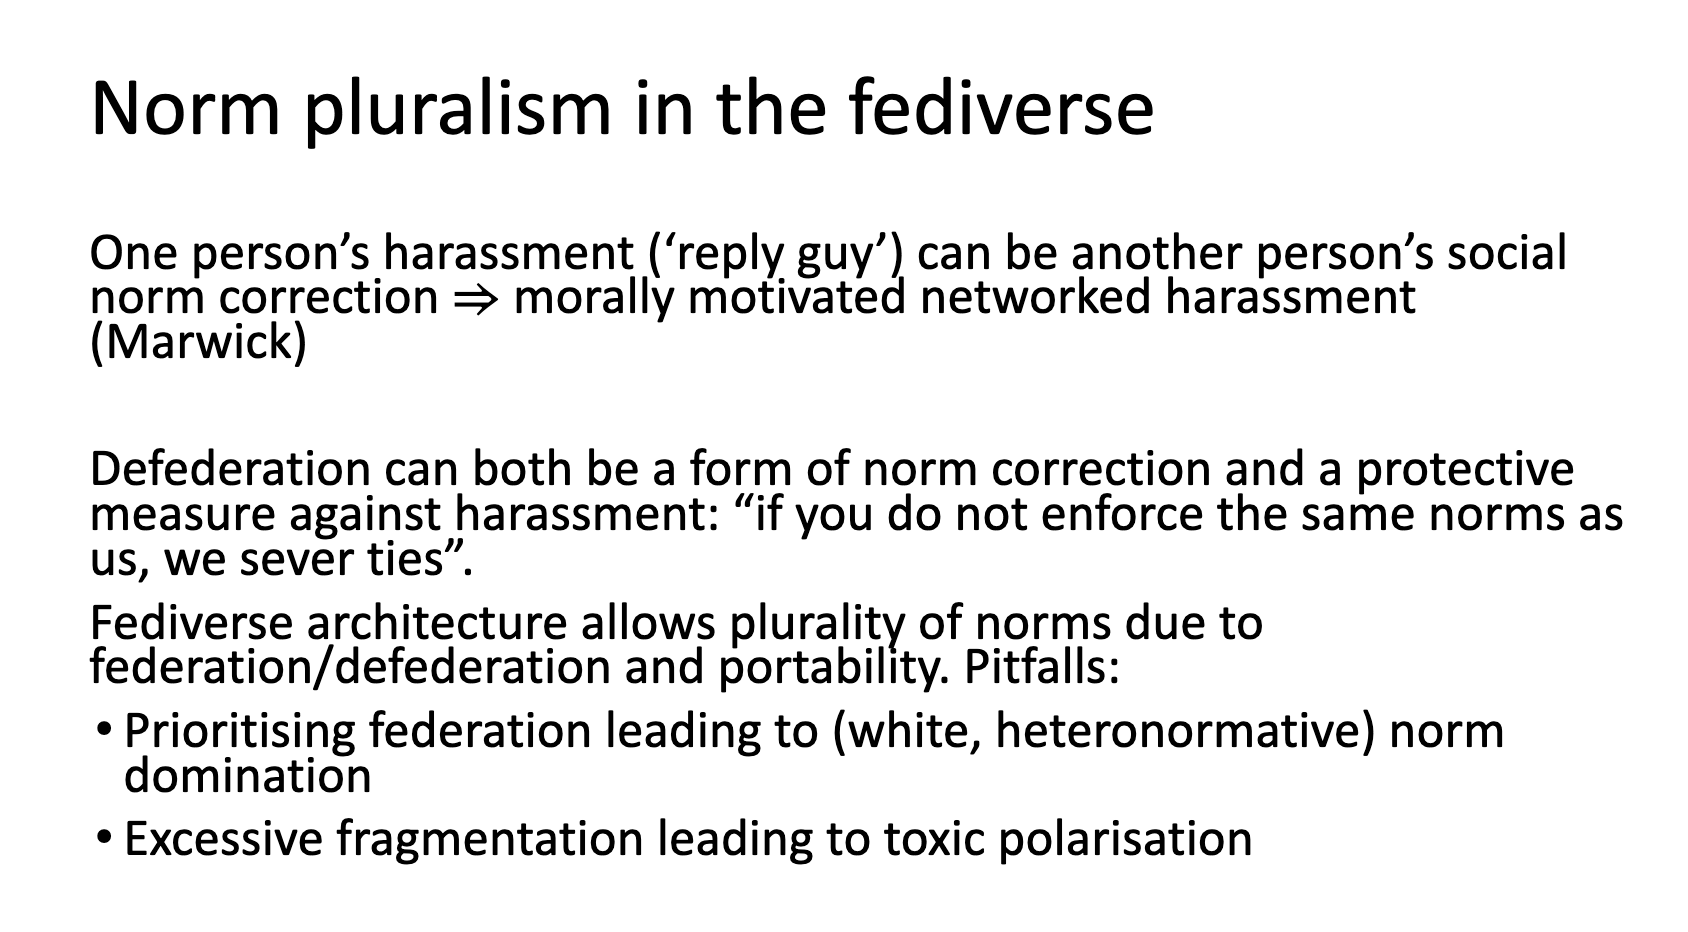 Norm pluralism in the fediverse: One person’s harassment (‘reply guy’) can be another person’s social norm correction ⇒ morally motivated networked harassment (Marwick)  Defederation can both be a form of norm correction and a protective measure against harassment: “if you do not enforce the same norms as us, we sever ties”.  Fediverse architecture allows plurality of norms due to federation/defederation and portability. Pitfalls:  Prioritising federation leading to (white, heteronormative) norm domination Excessive fragmentation leading to toxic polarisation